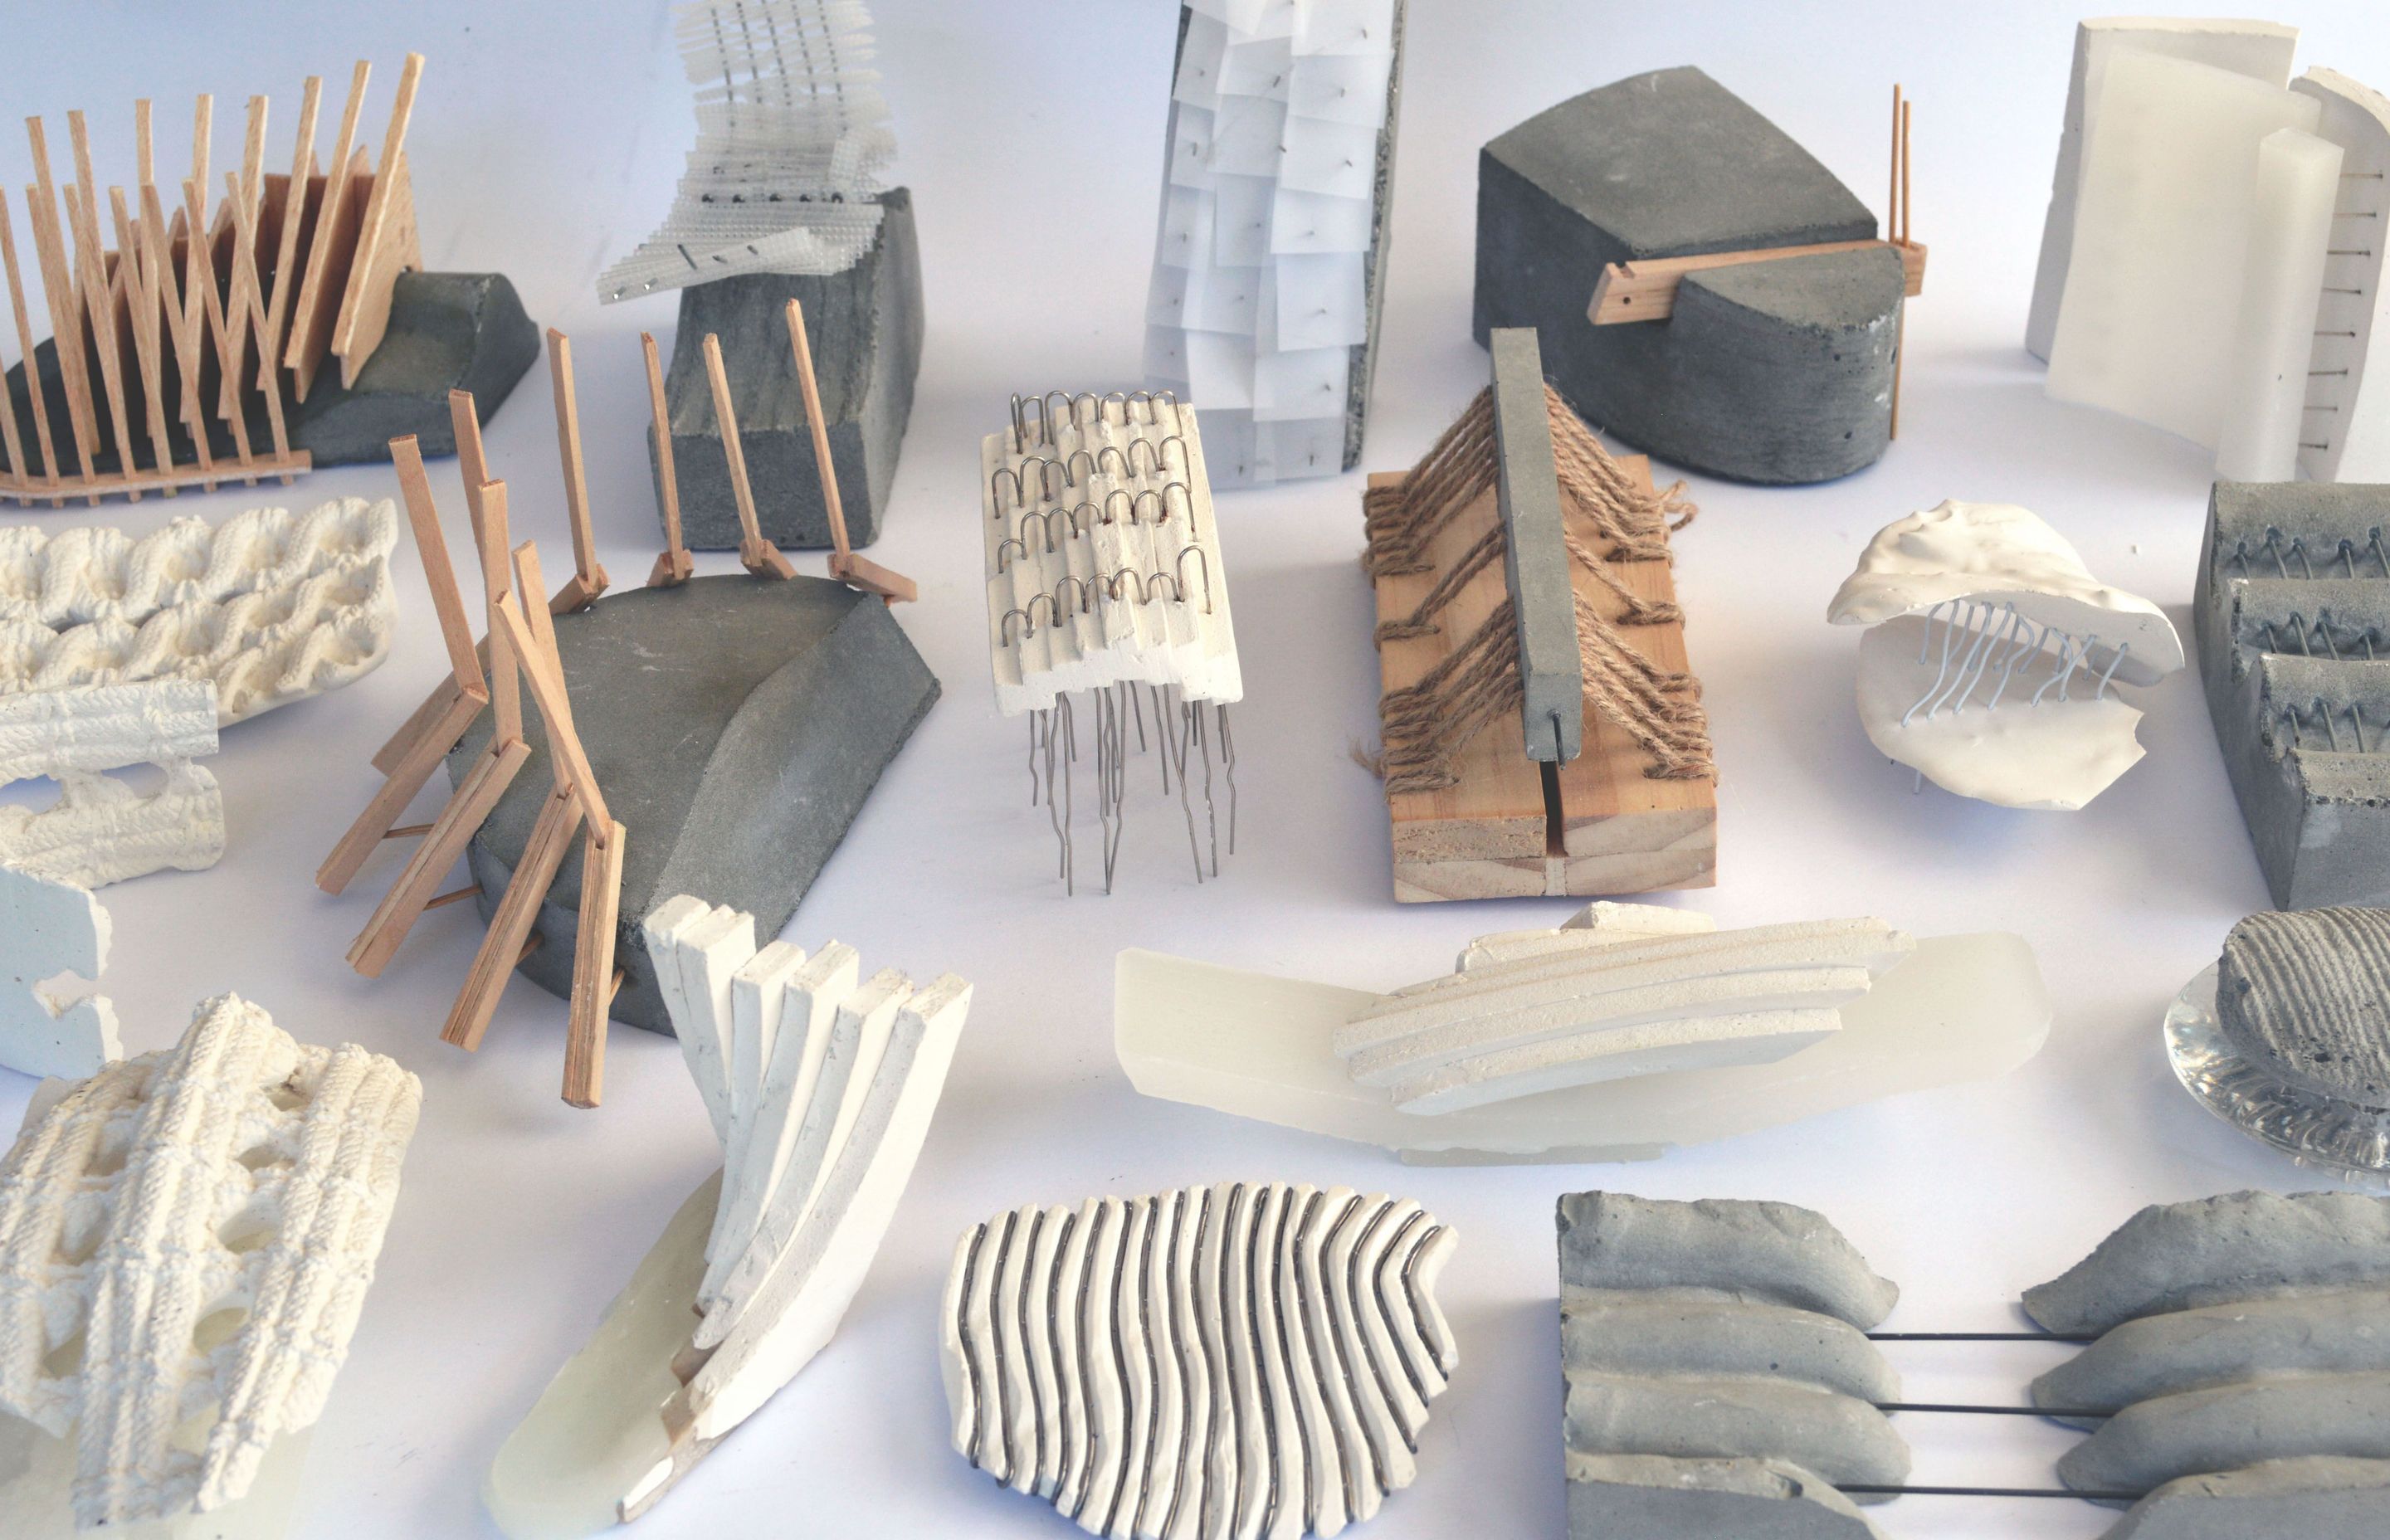 Models created as part of Daniell's thesis project: ‘Once the Dust Settles: Weaving a Cloak of Resilience for Hinemoa Point’.